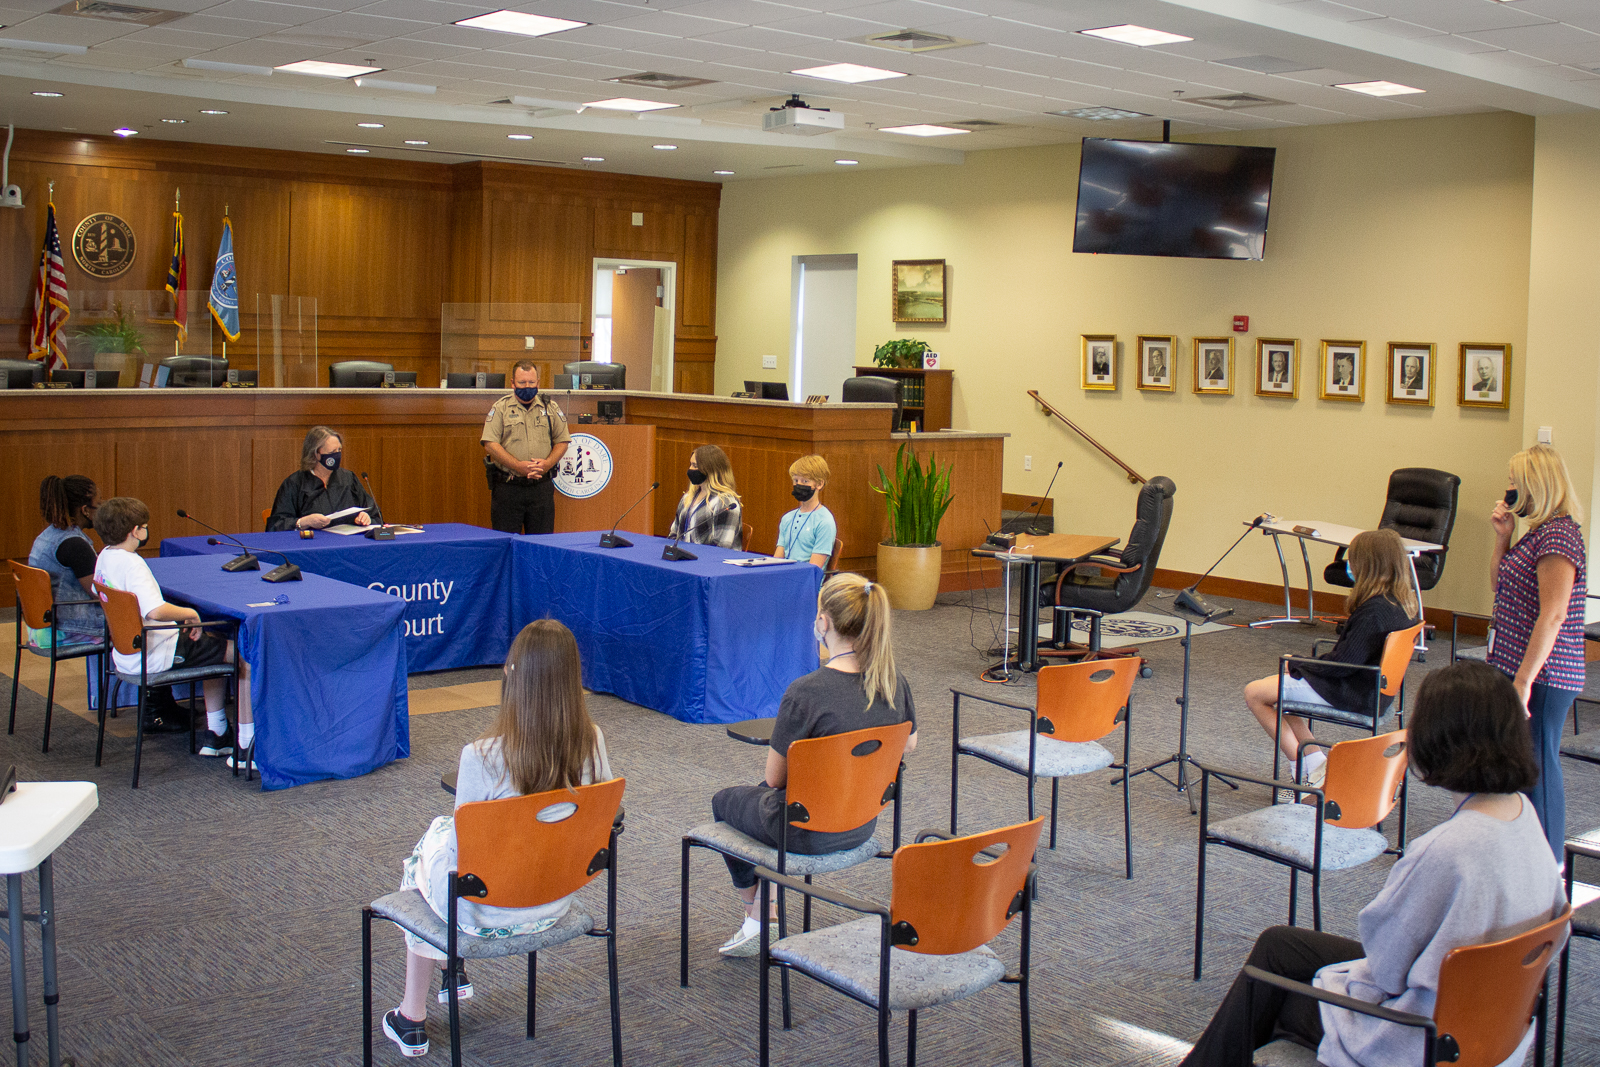 Image of teen court trial. Four students and a judge sit at a table while other students watch from chairs.